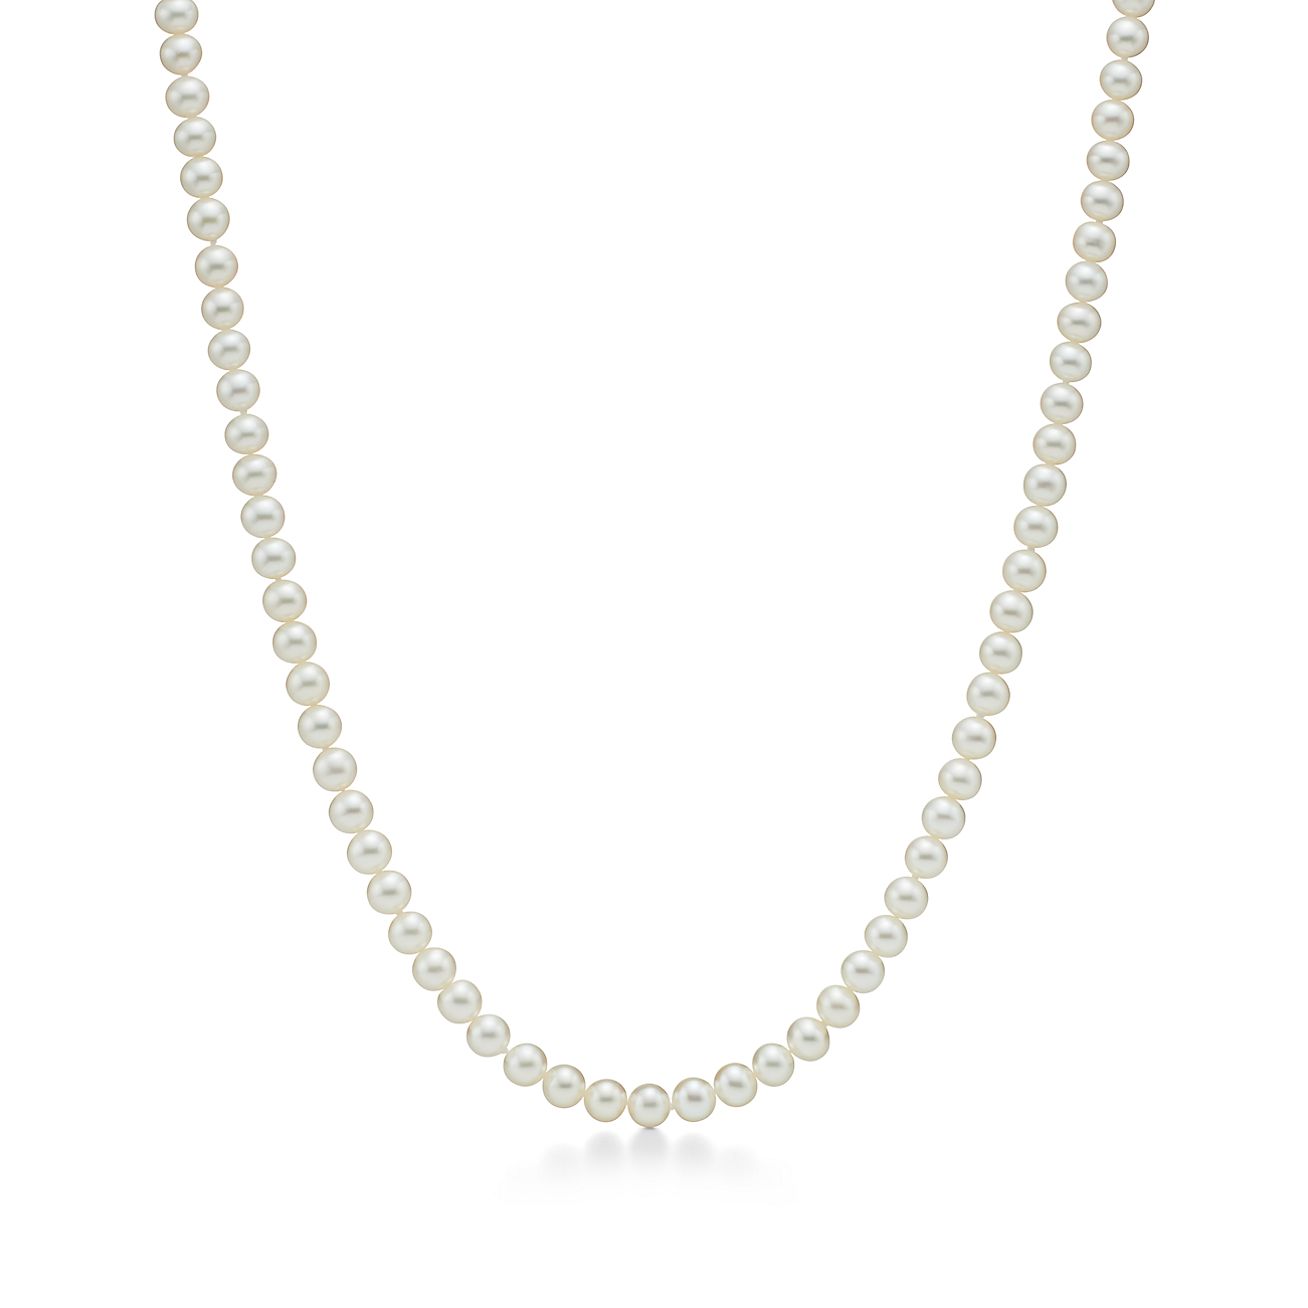 Ziegfeld Collection Pearl Necklace with a Silver Clasp, 6-7 mm | Tiffany &